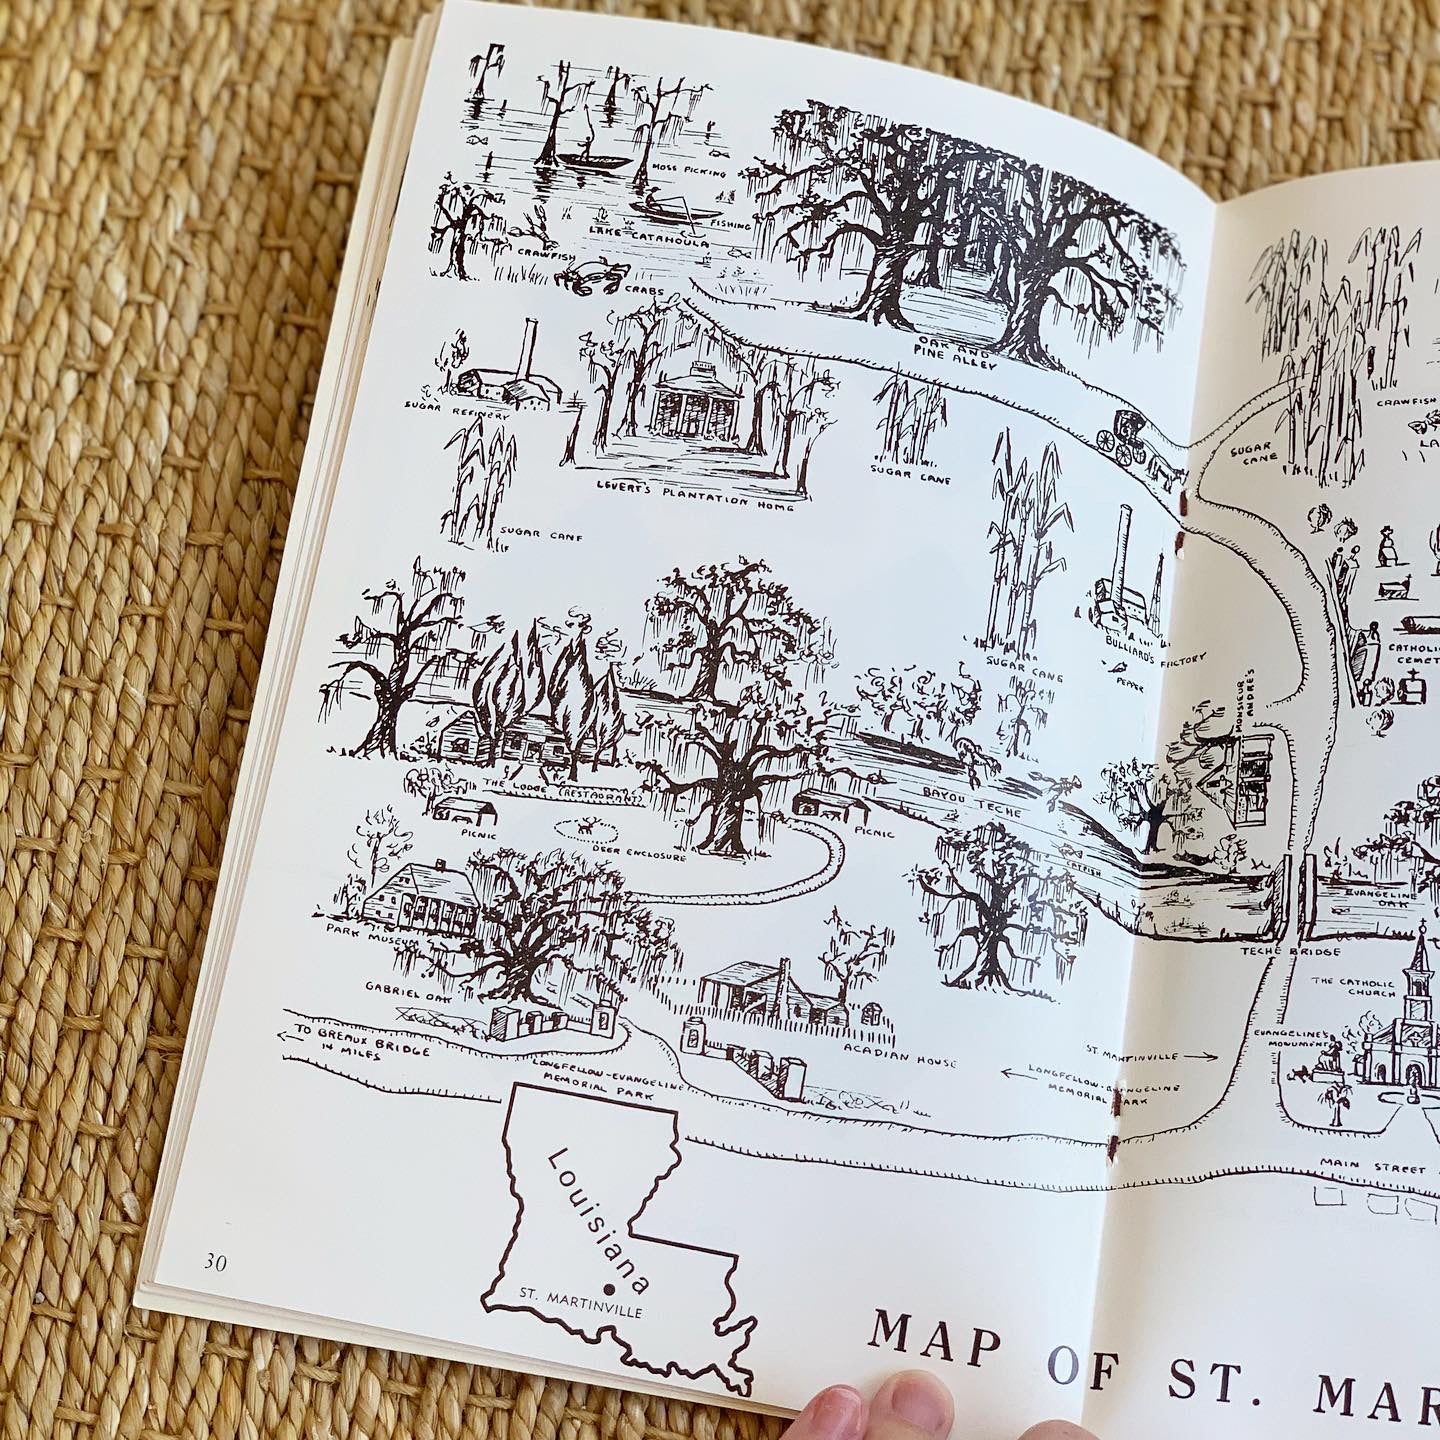 St. Martinville: Land of Evangeline in Picture Story Guide (1981)